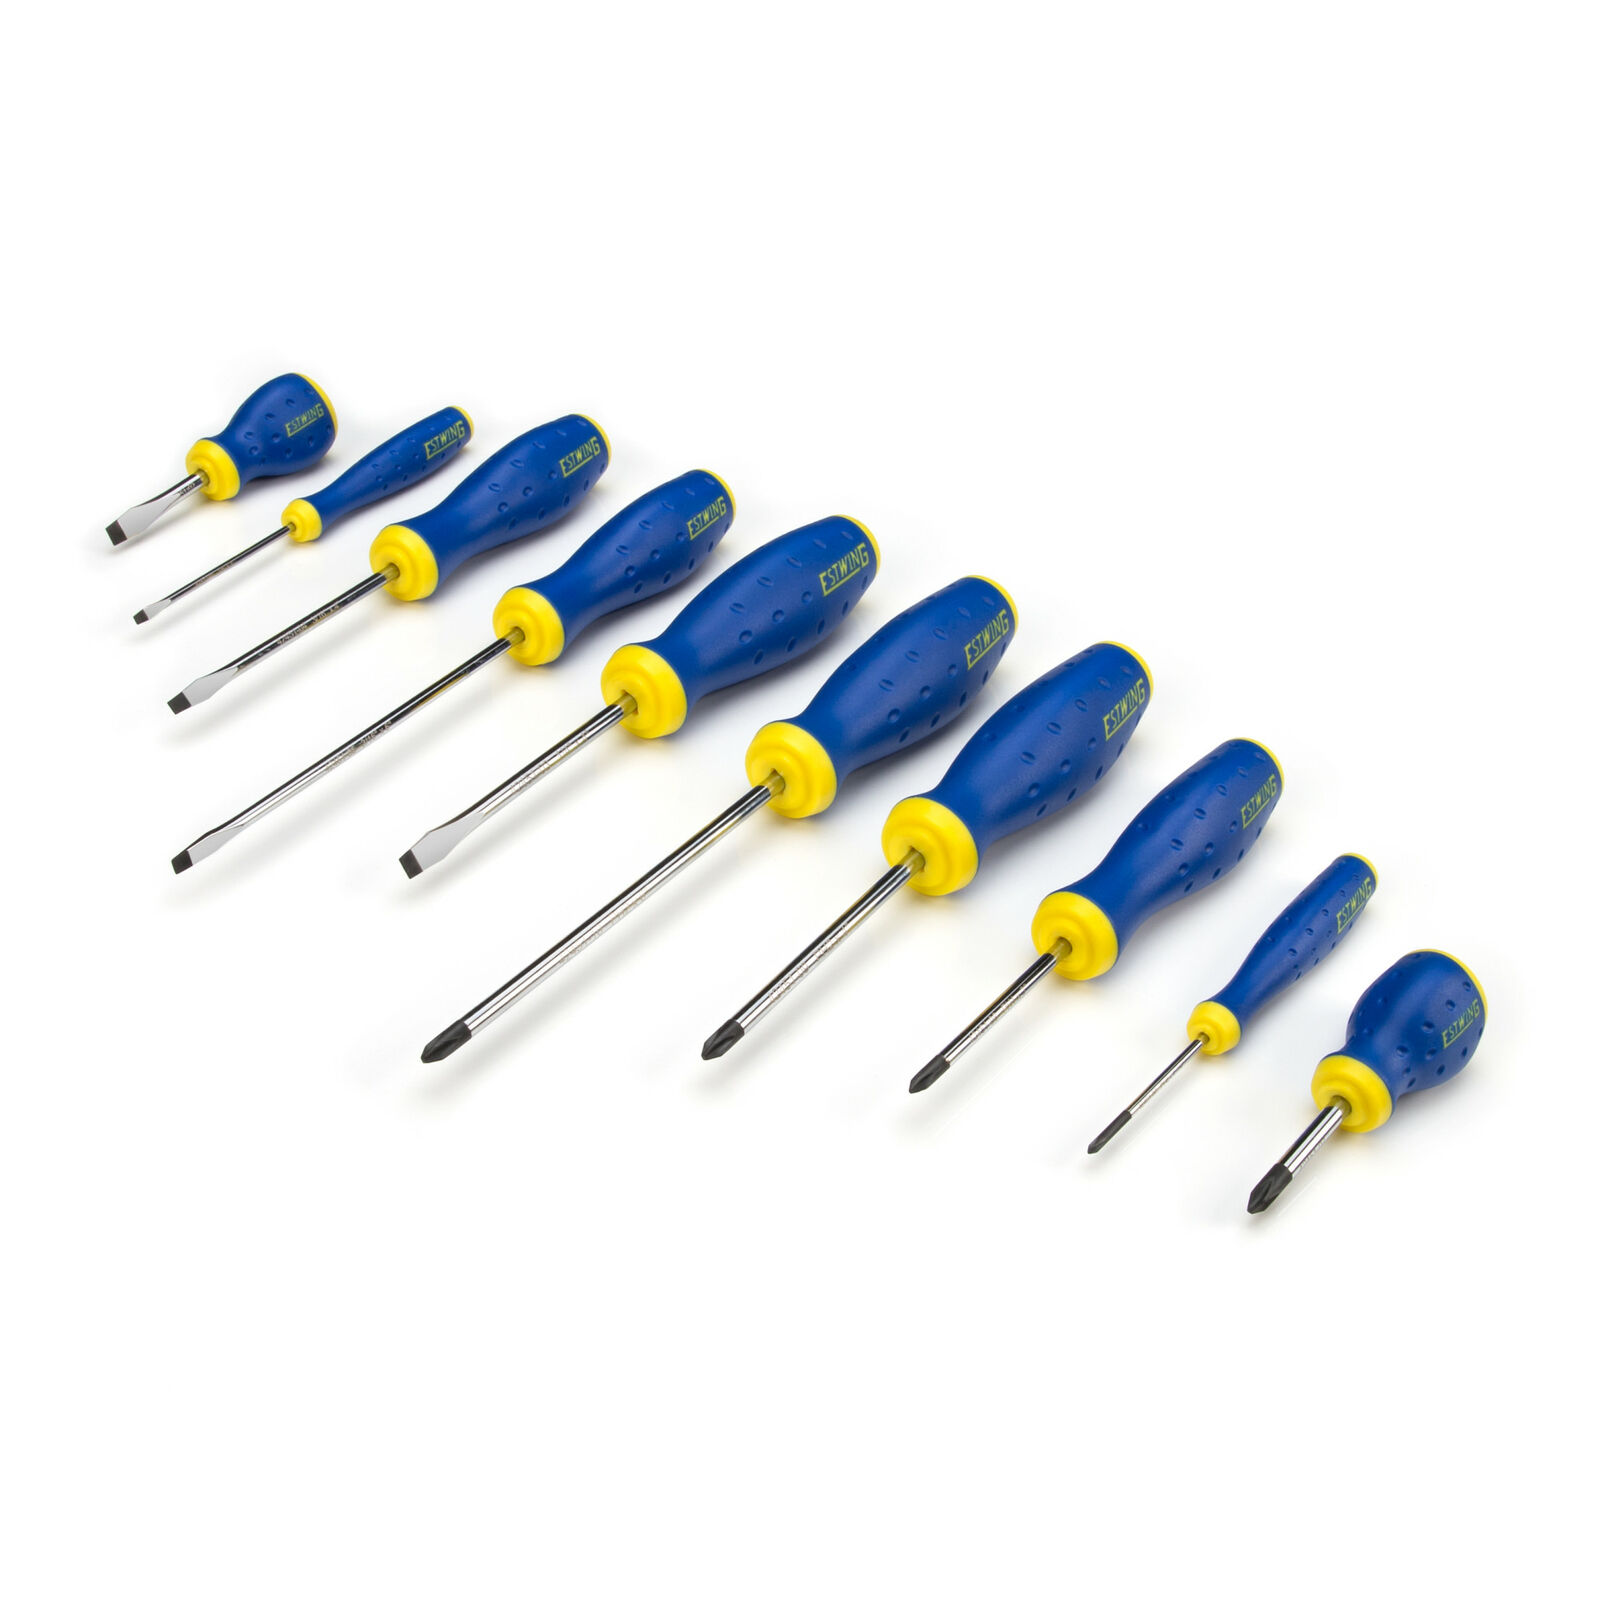 Estwing 10 Pc. Phillips and Slotted Screwdriver Set 42451